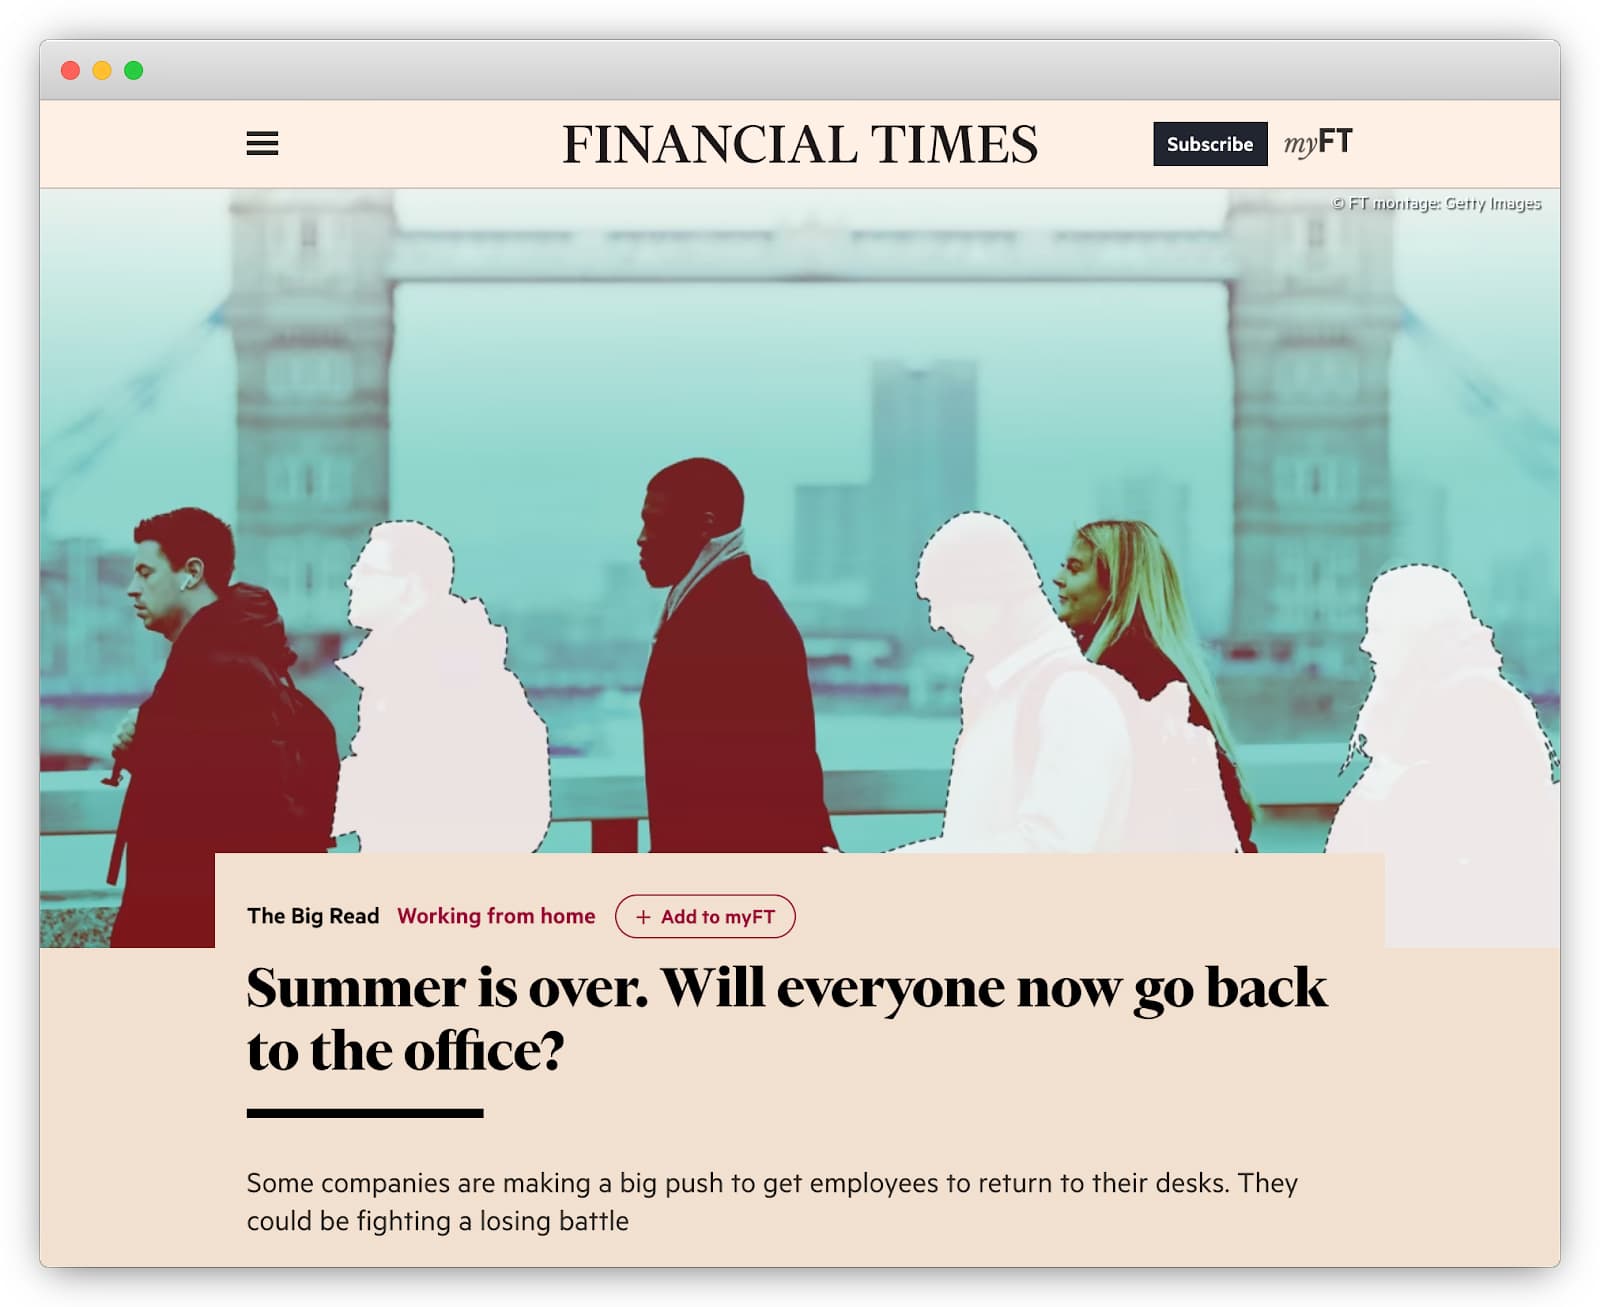 Financial Times article “Summer is over. Will everyone now go back to work?” (Raval and Edgecliffe-Johnson). 